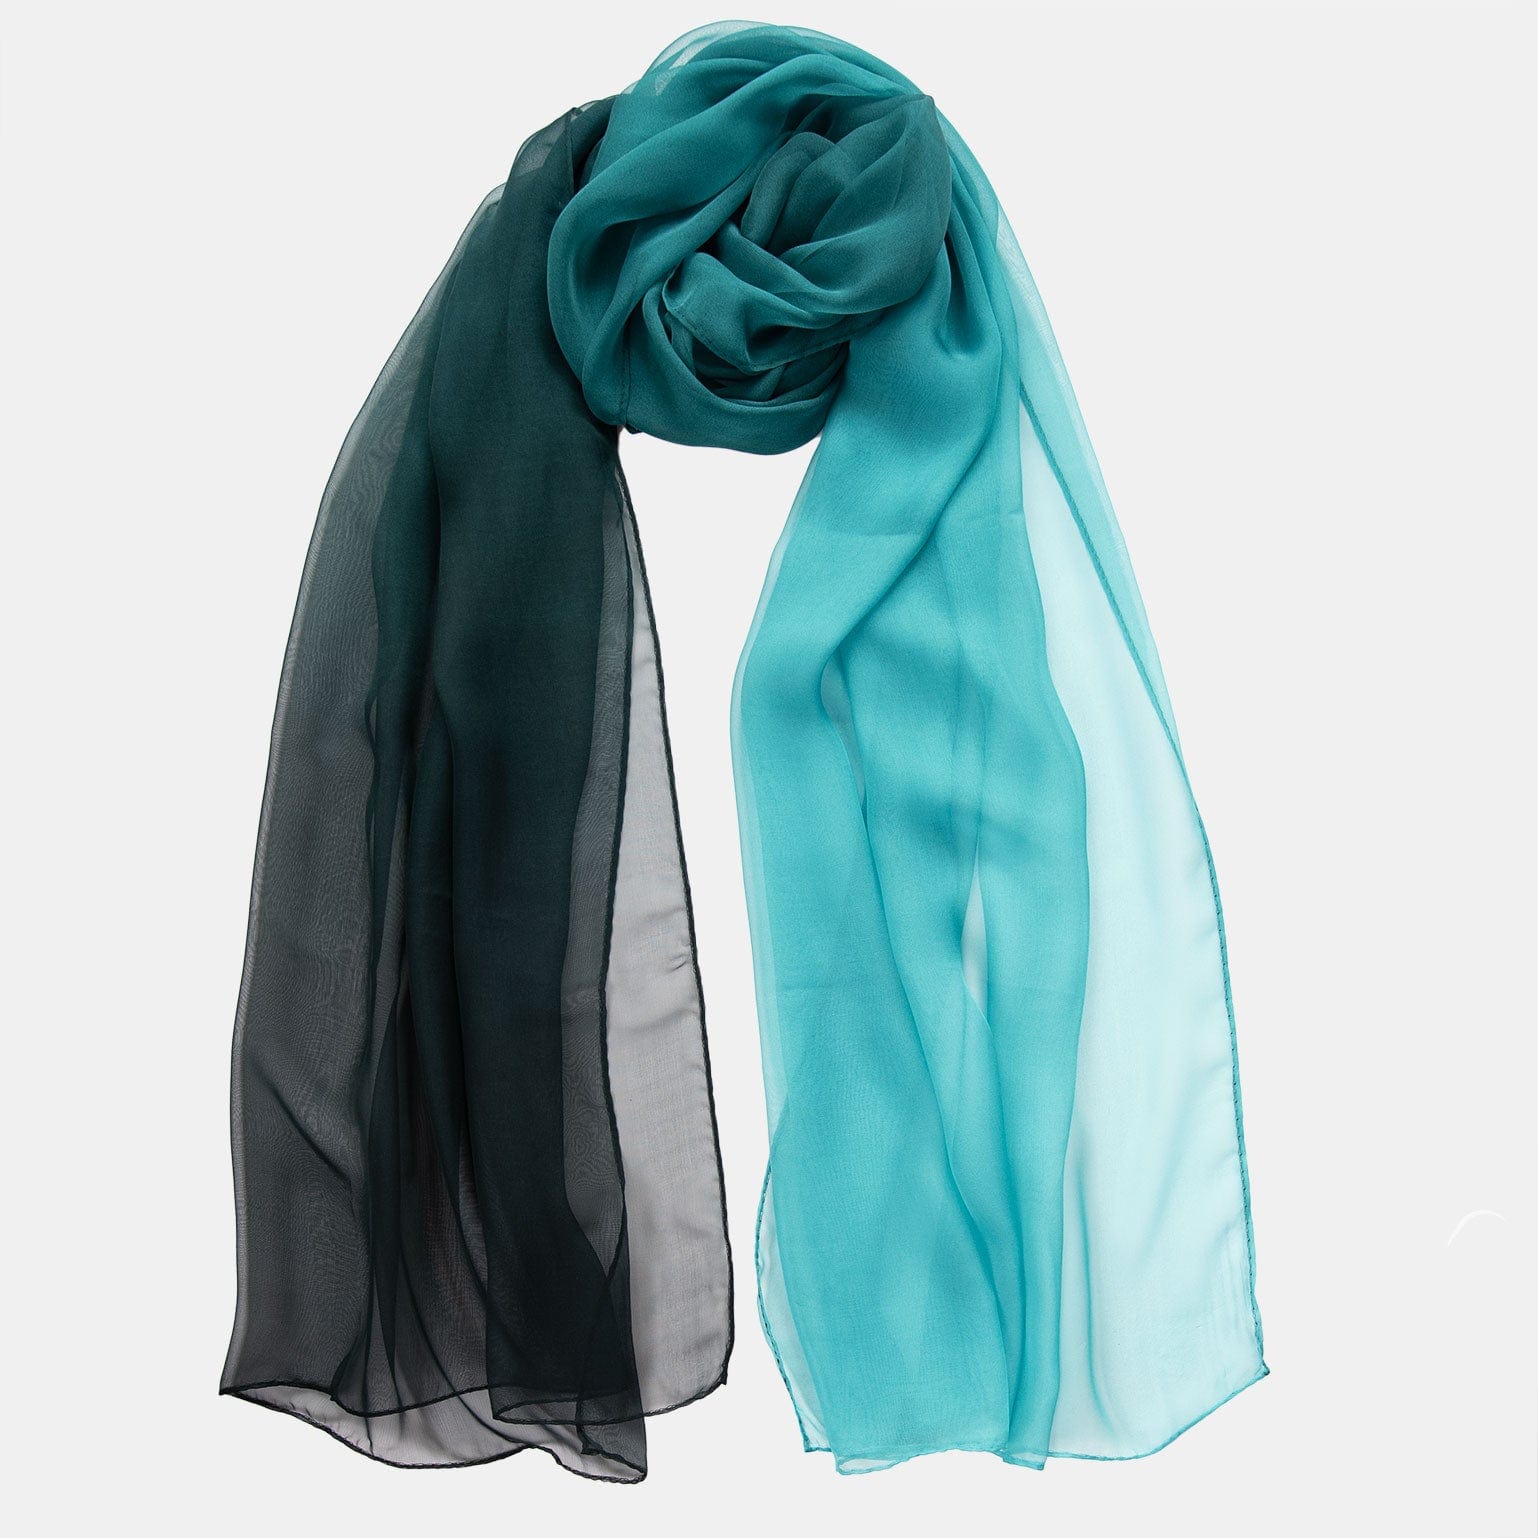 Turquoise sheer silk evening wrap for dresses